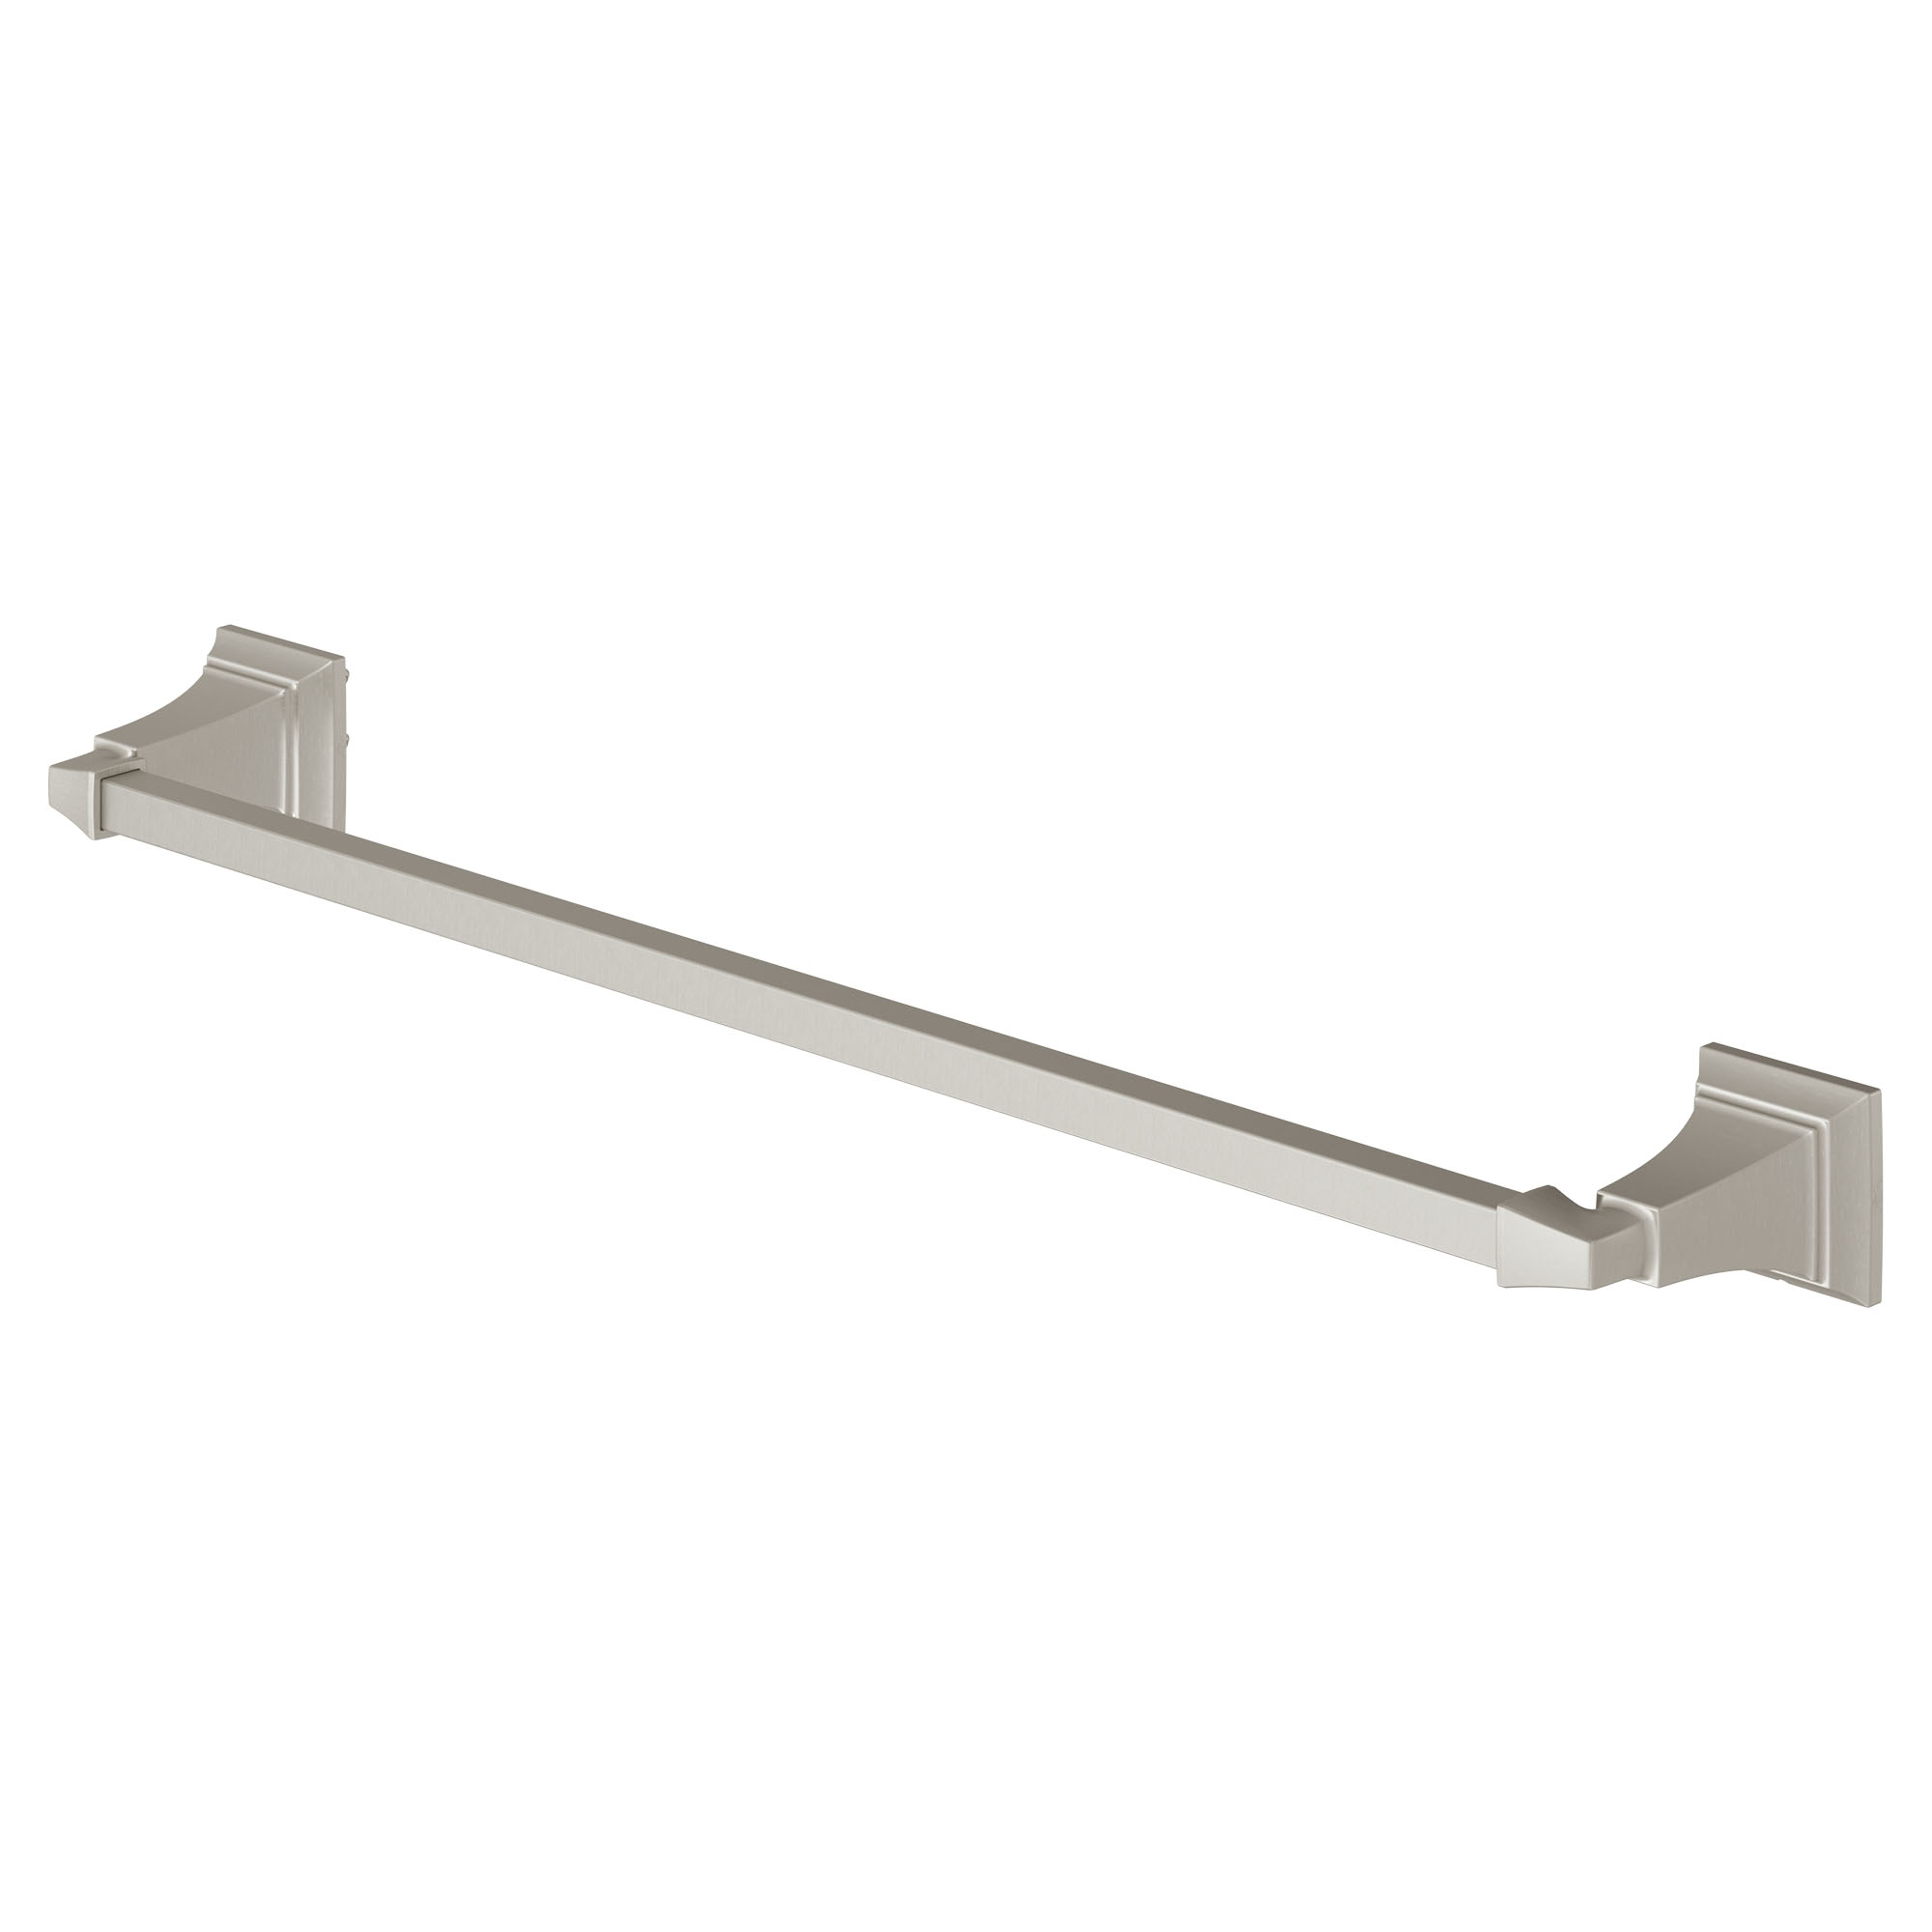 Town Square® S 24-Inch Towel Bar